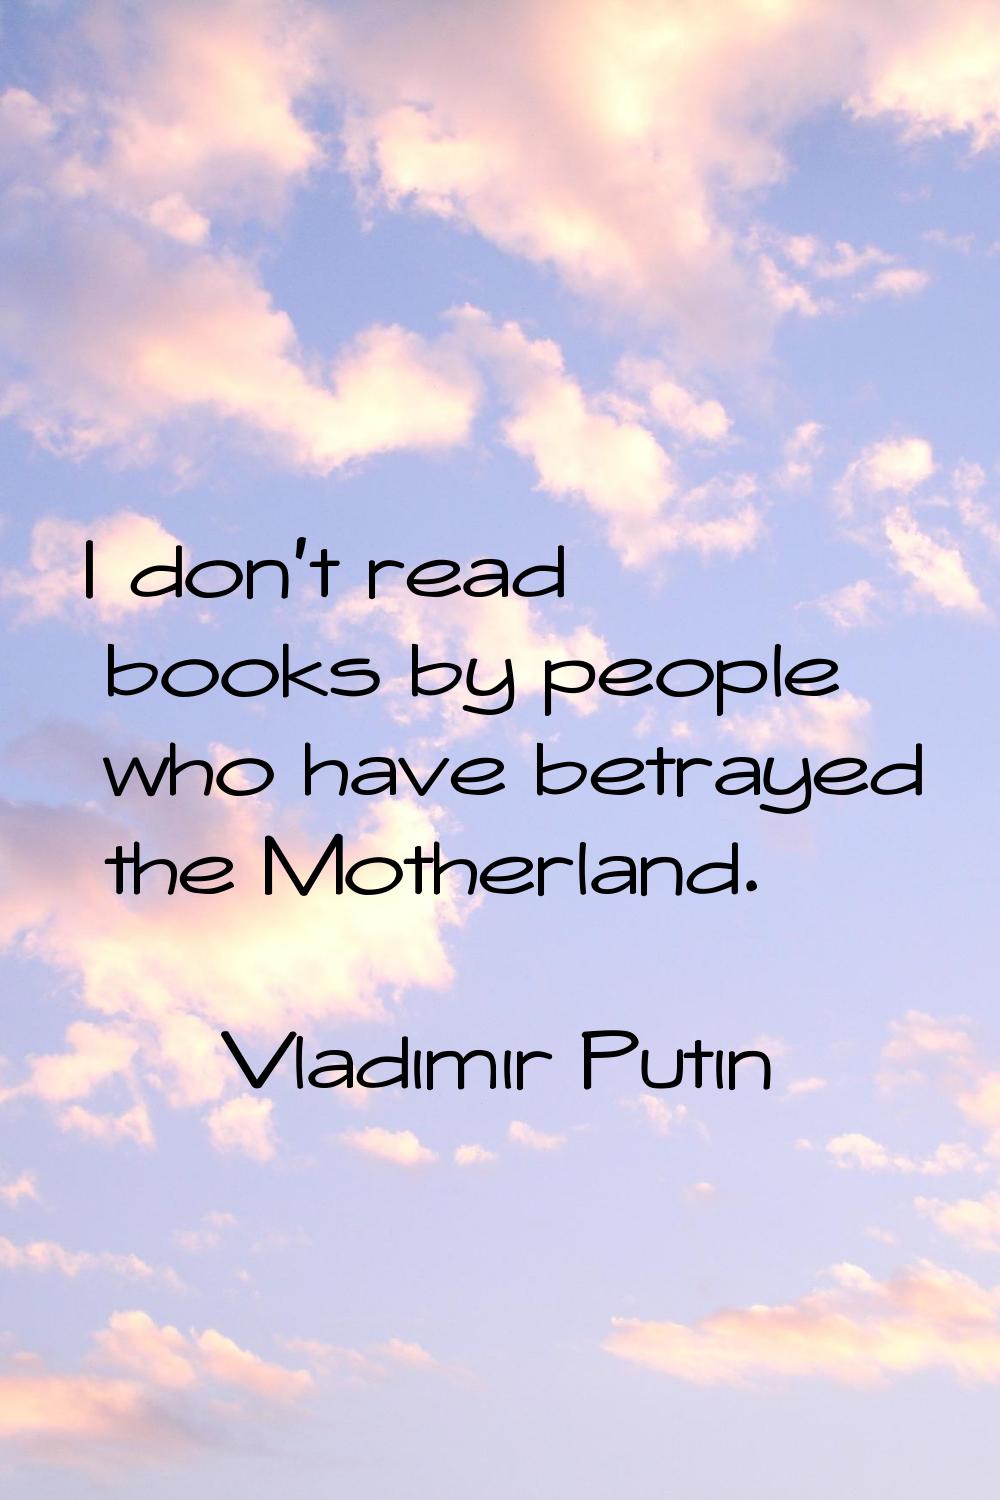 I don't read books by people who have betrayed the Motherland.